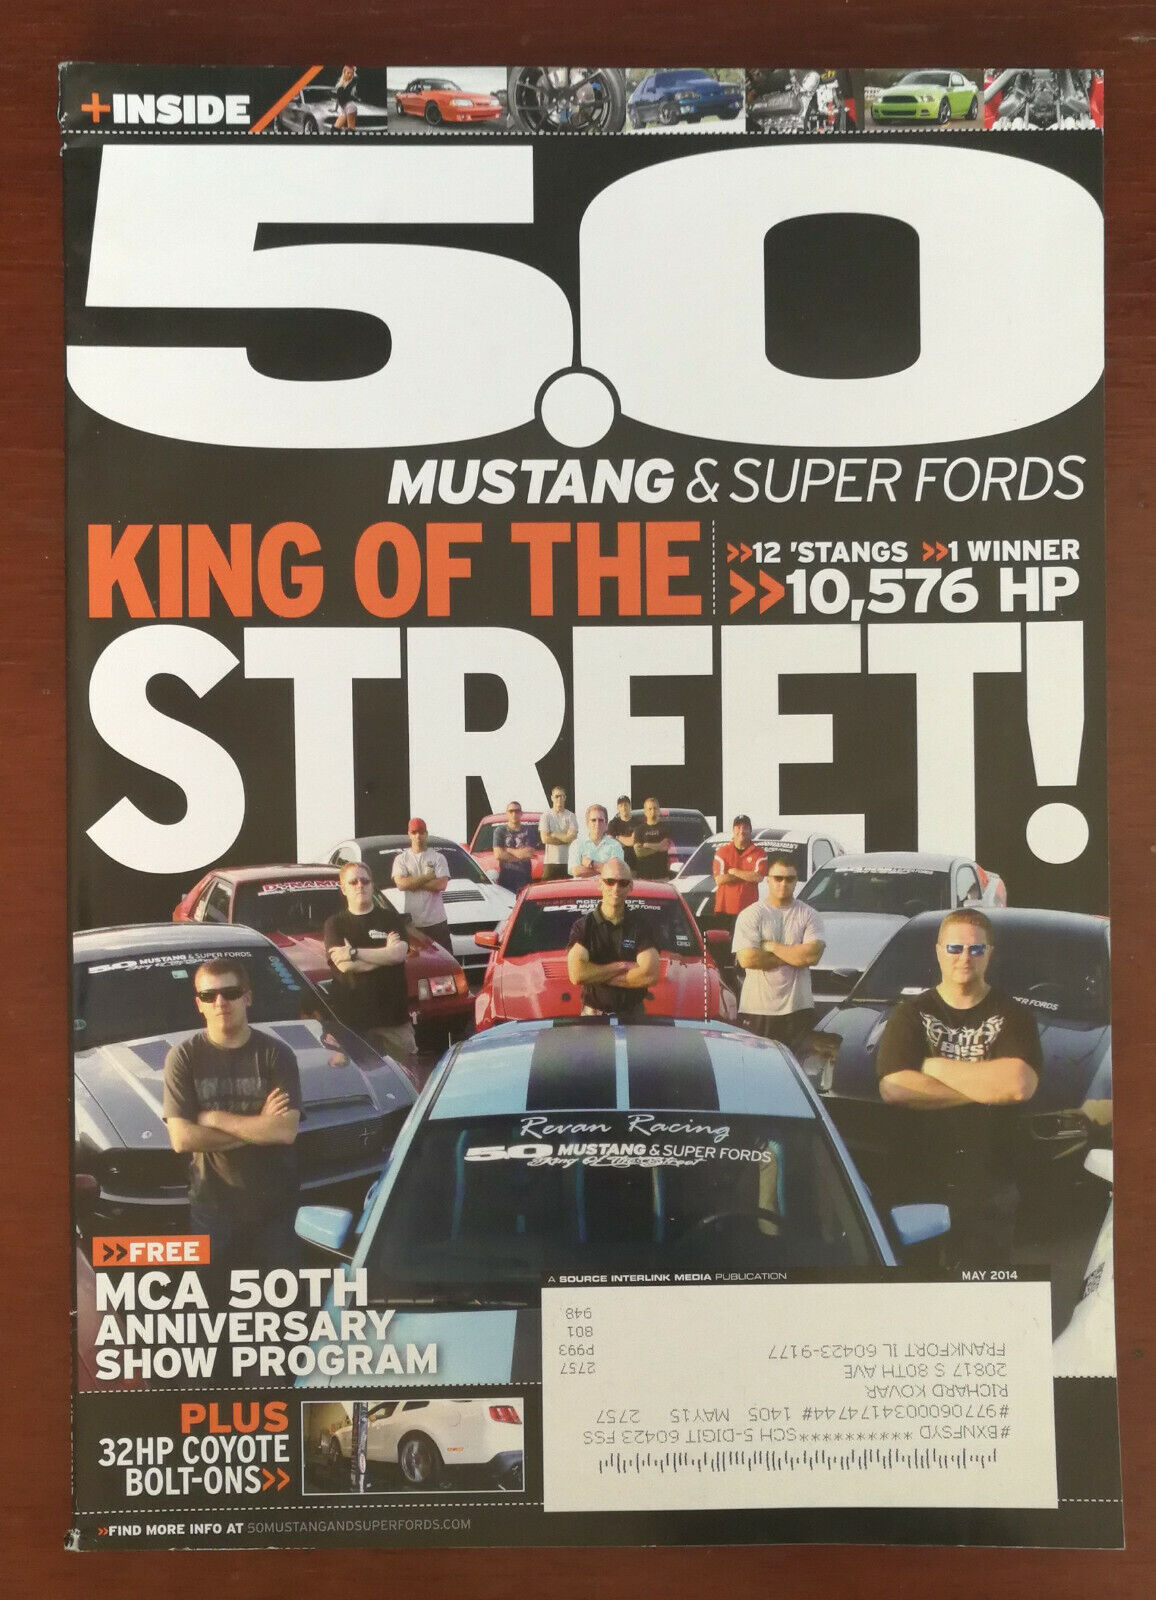 5.0 Mustang & Super Fords May 2014 -  2013 King of The Street Mustangs - SEMA